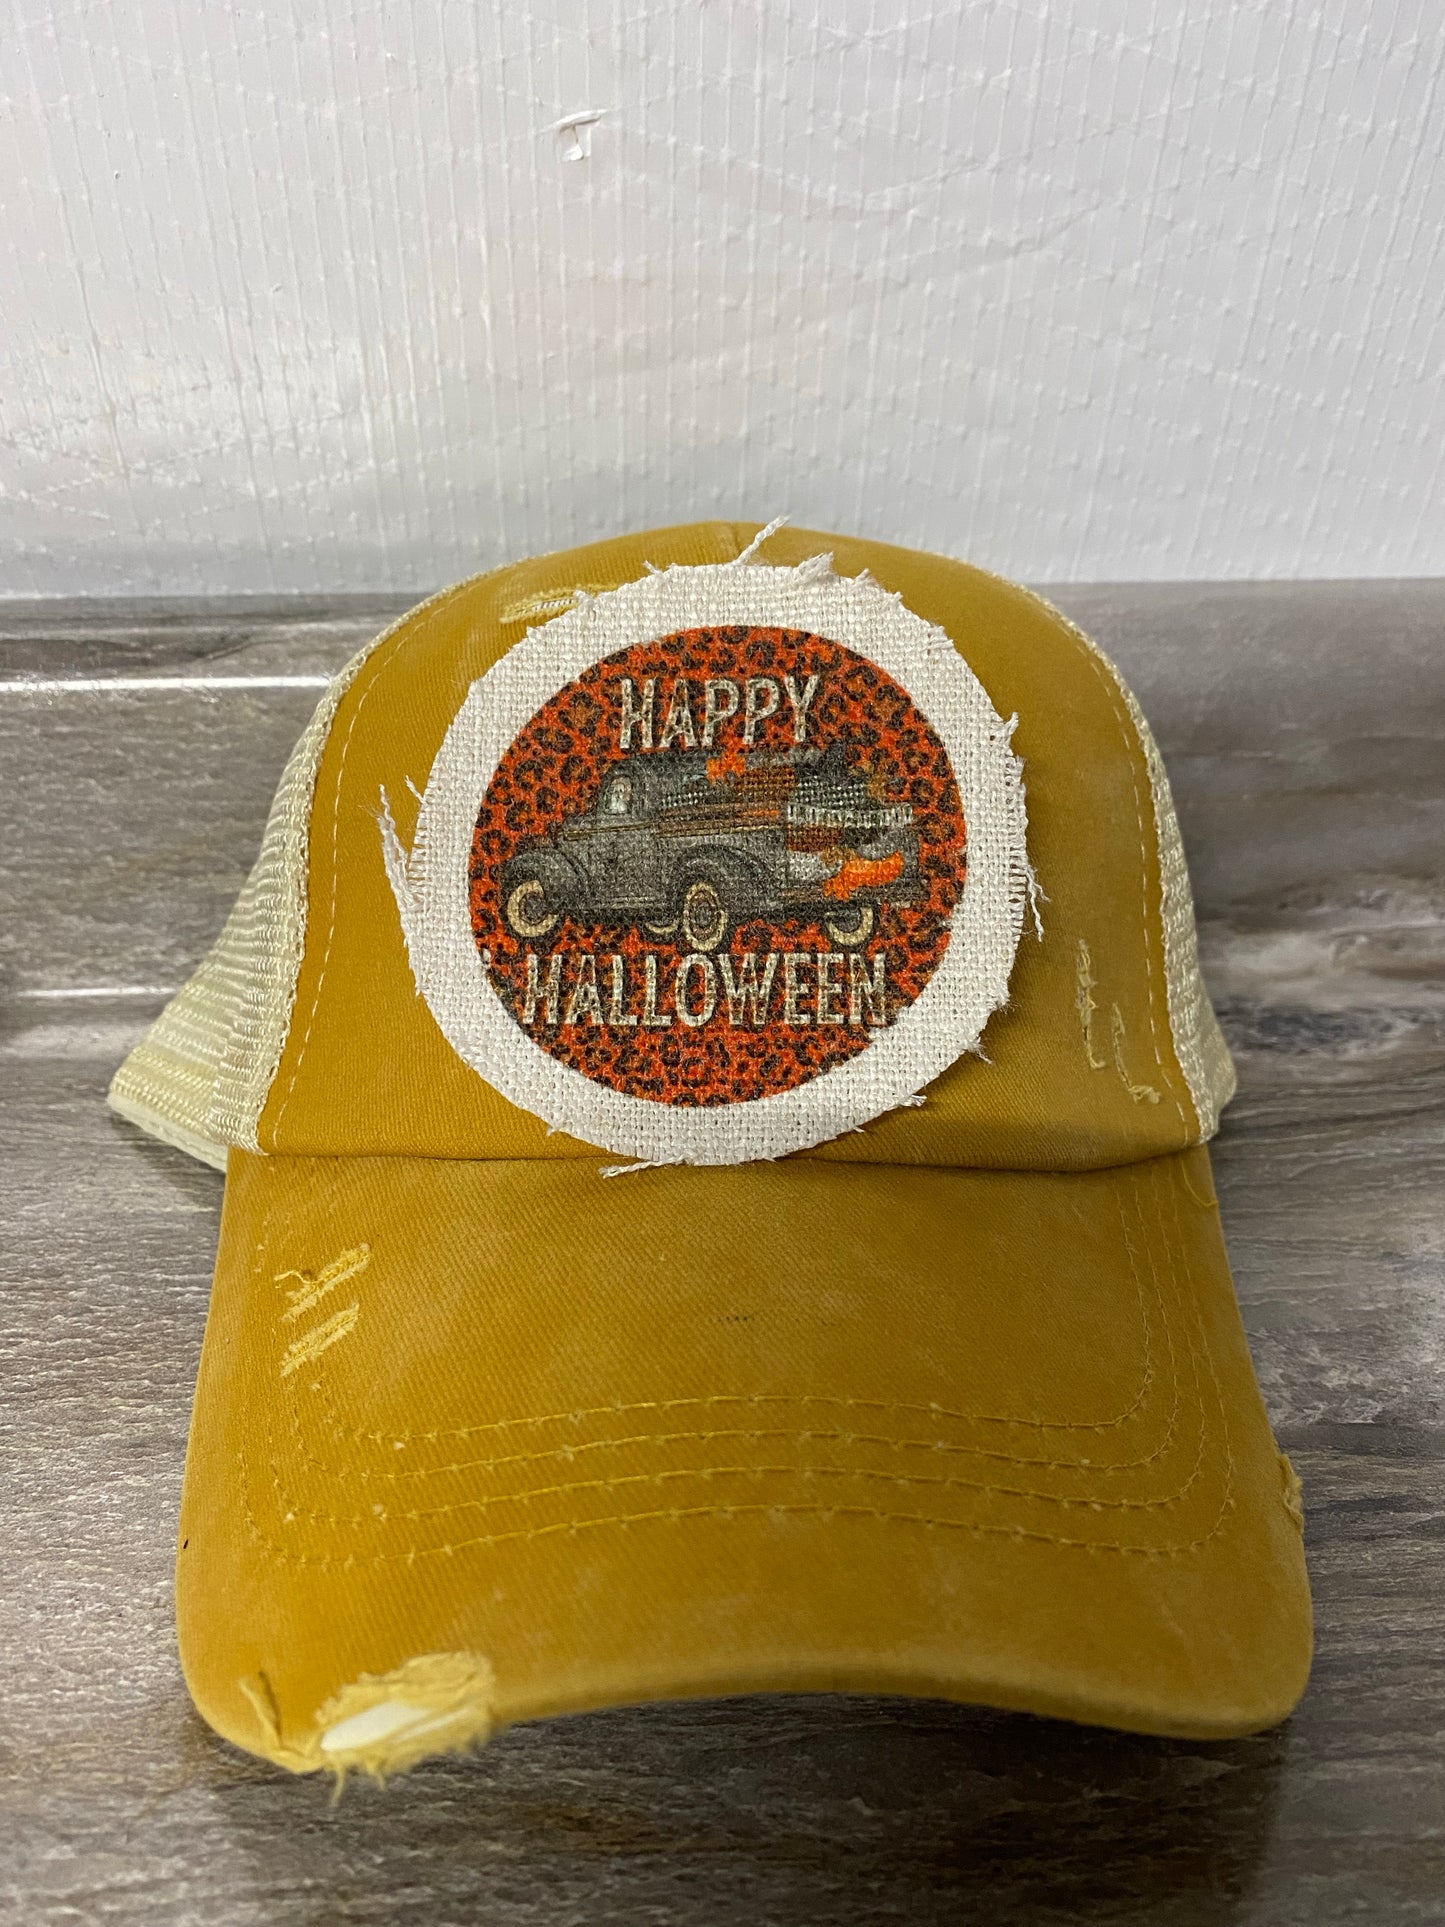 Happy Halloween with Truck Hat Patch